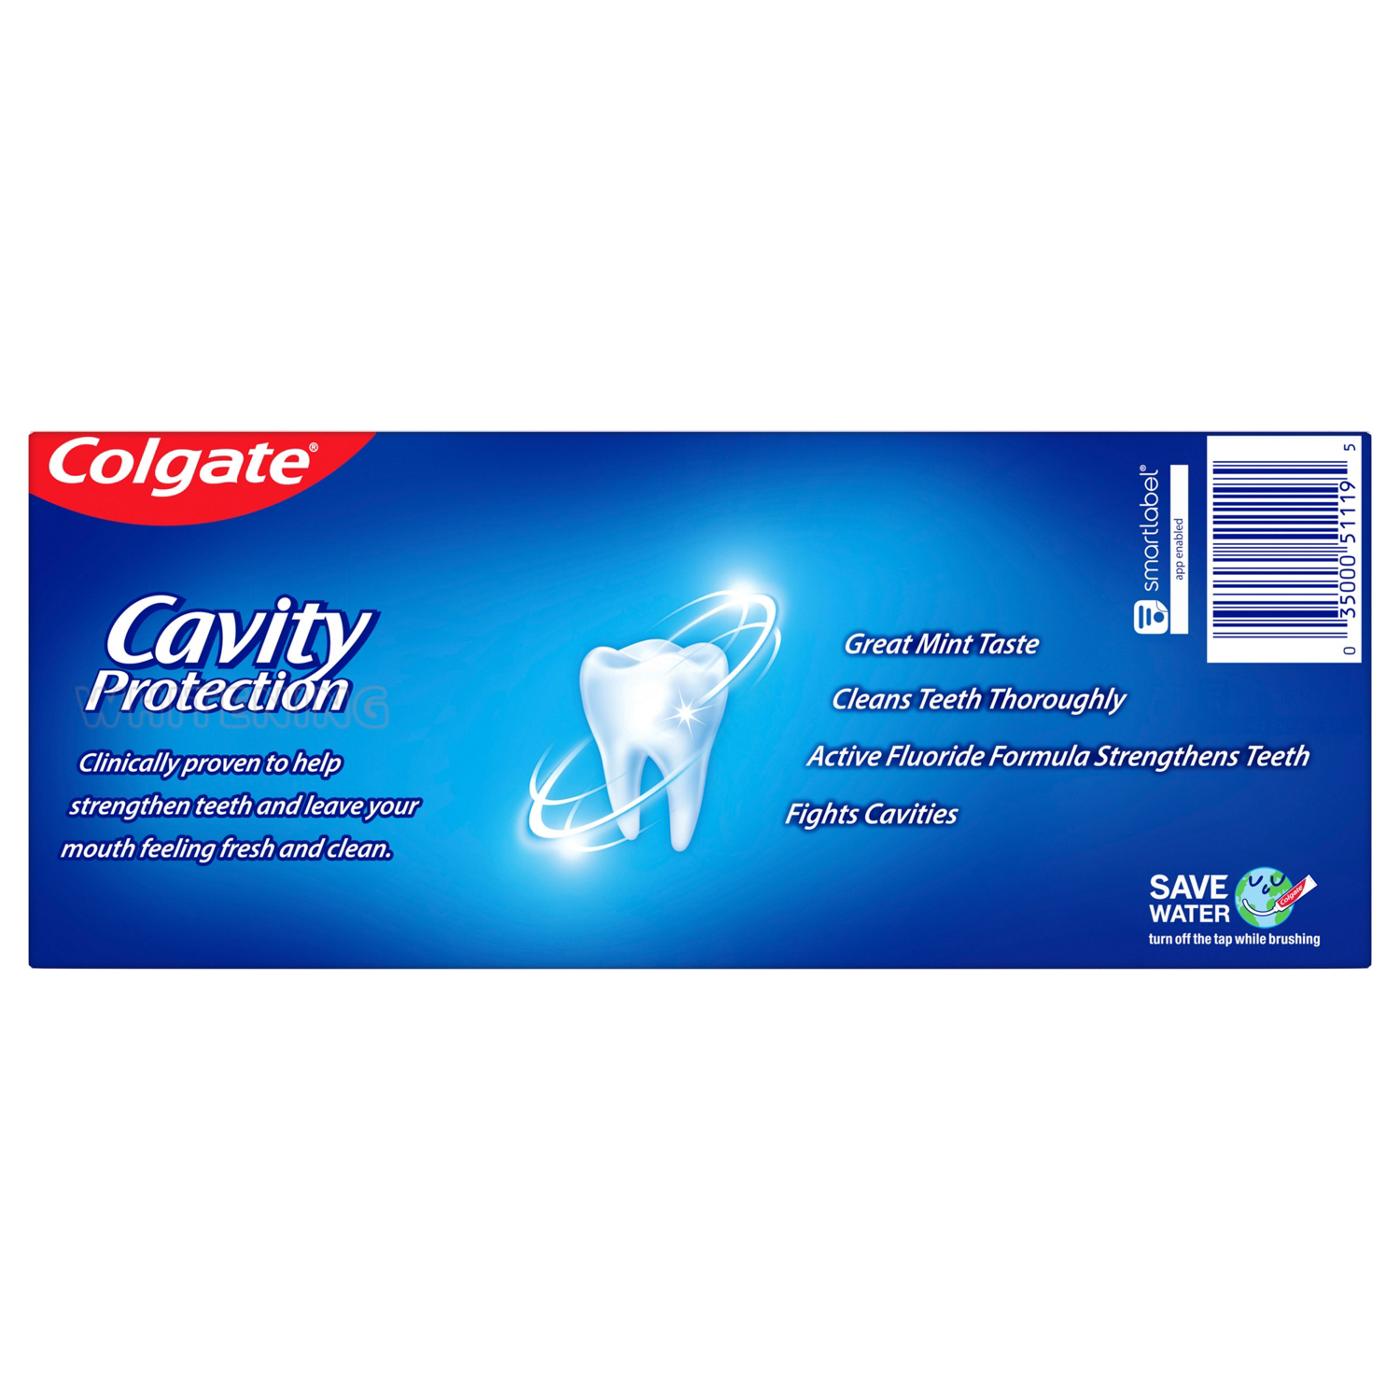 Colgate Cavity Protection Anticavity Toothpaste, 2 Pk; image 3 of 3